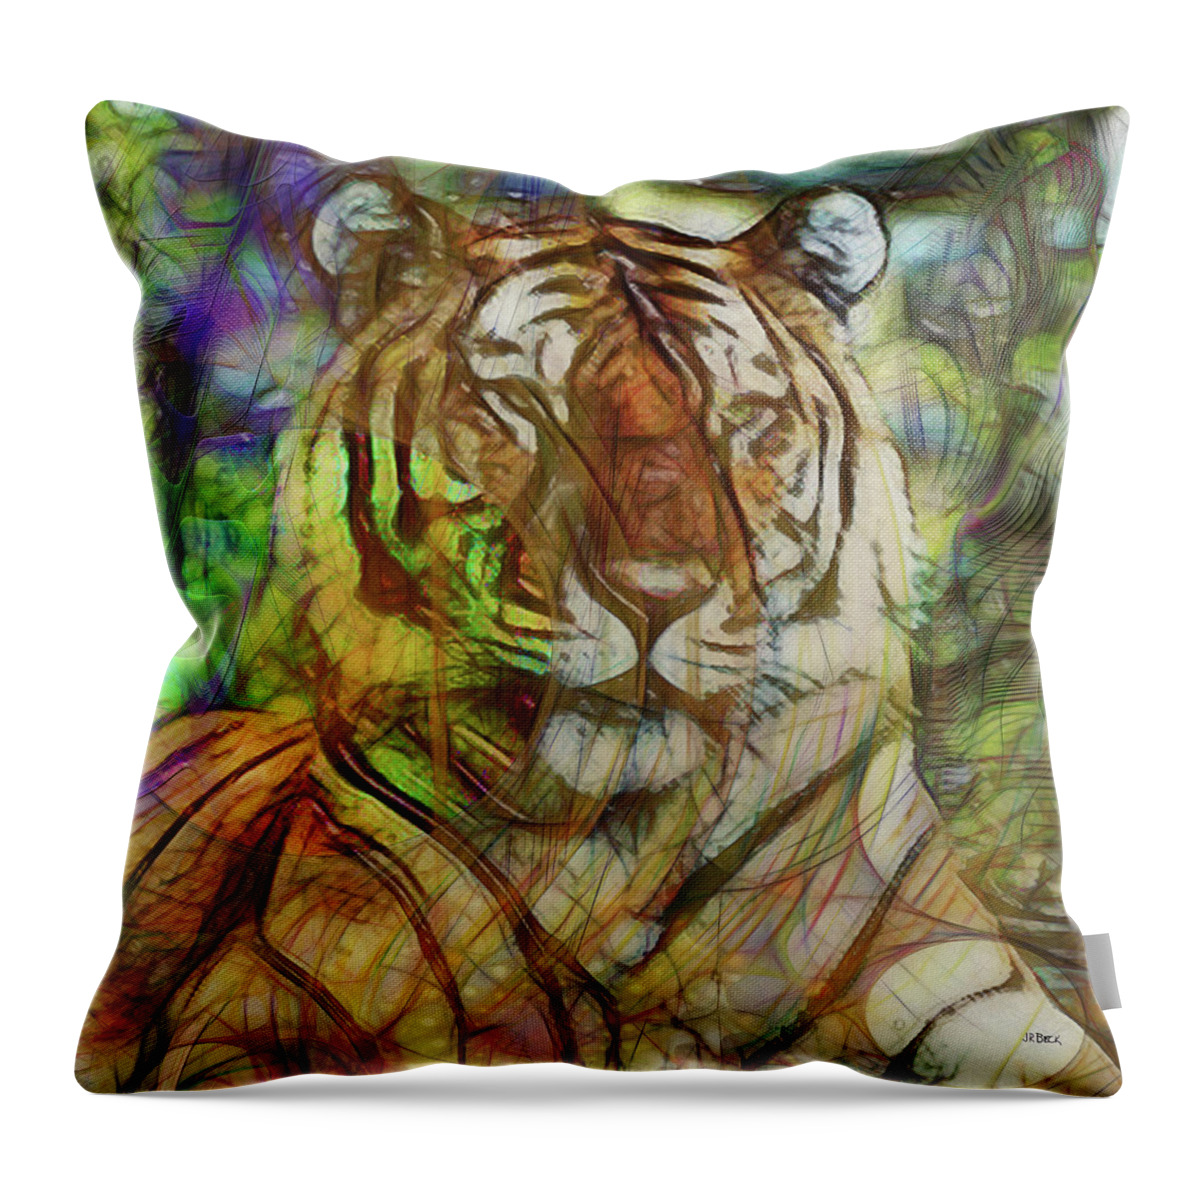 Tiger Throw Pillow featuring the digital art Shere Khan - Square Version by Studio B Prints